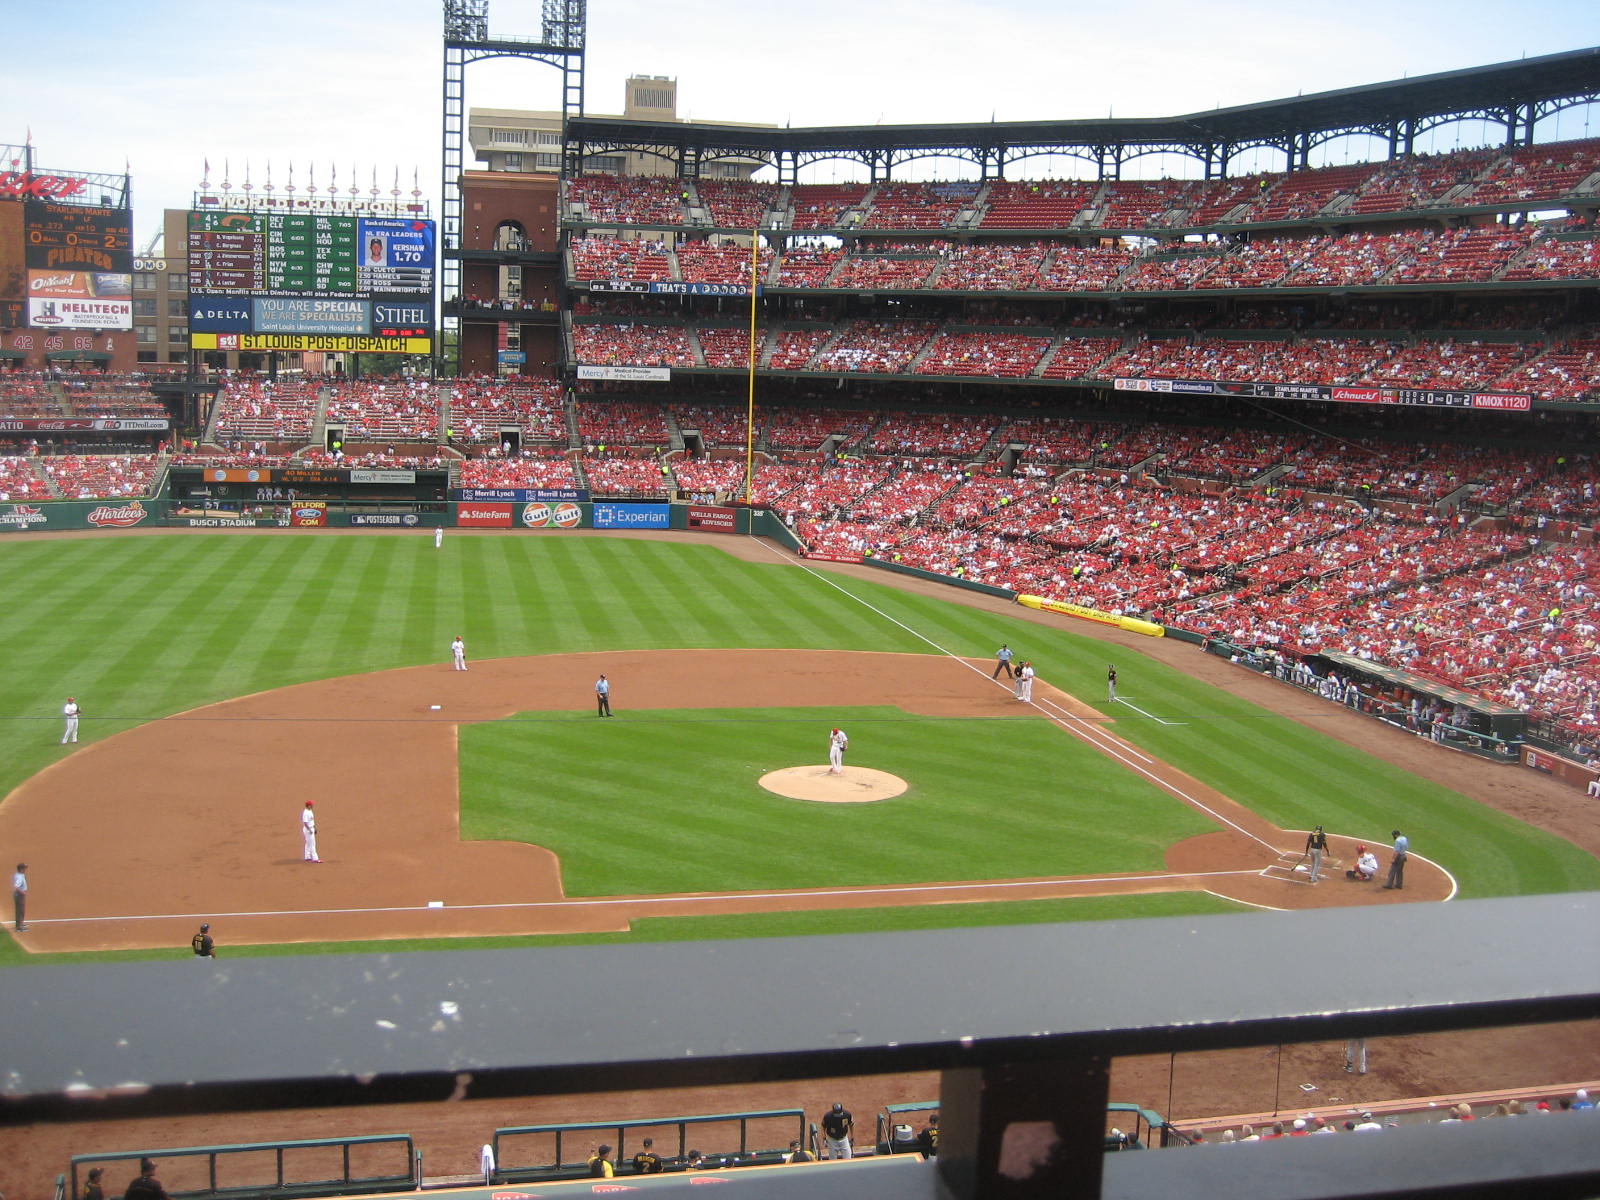 section 257, row 1 seat view  - busch stadium